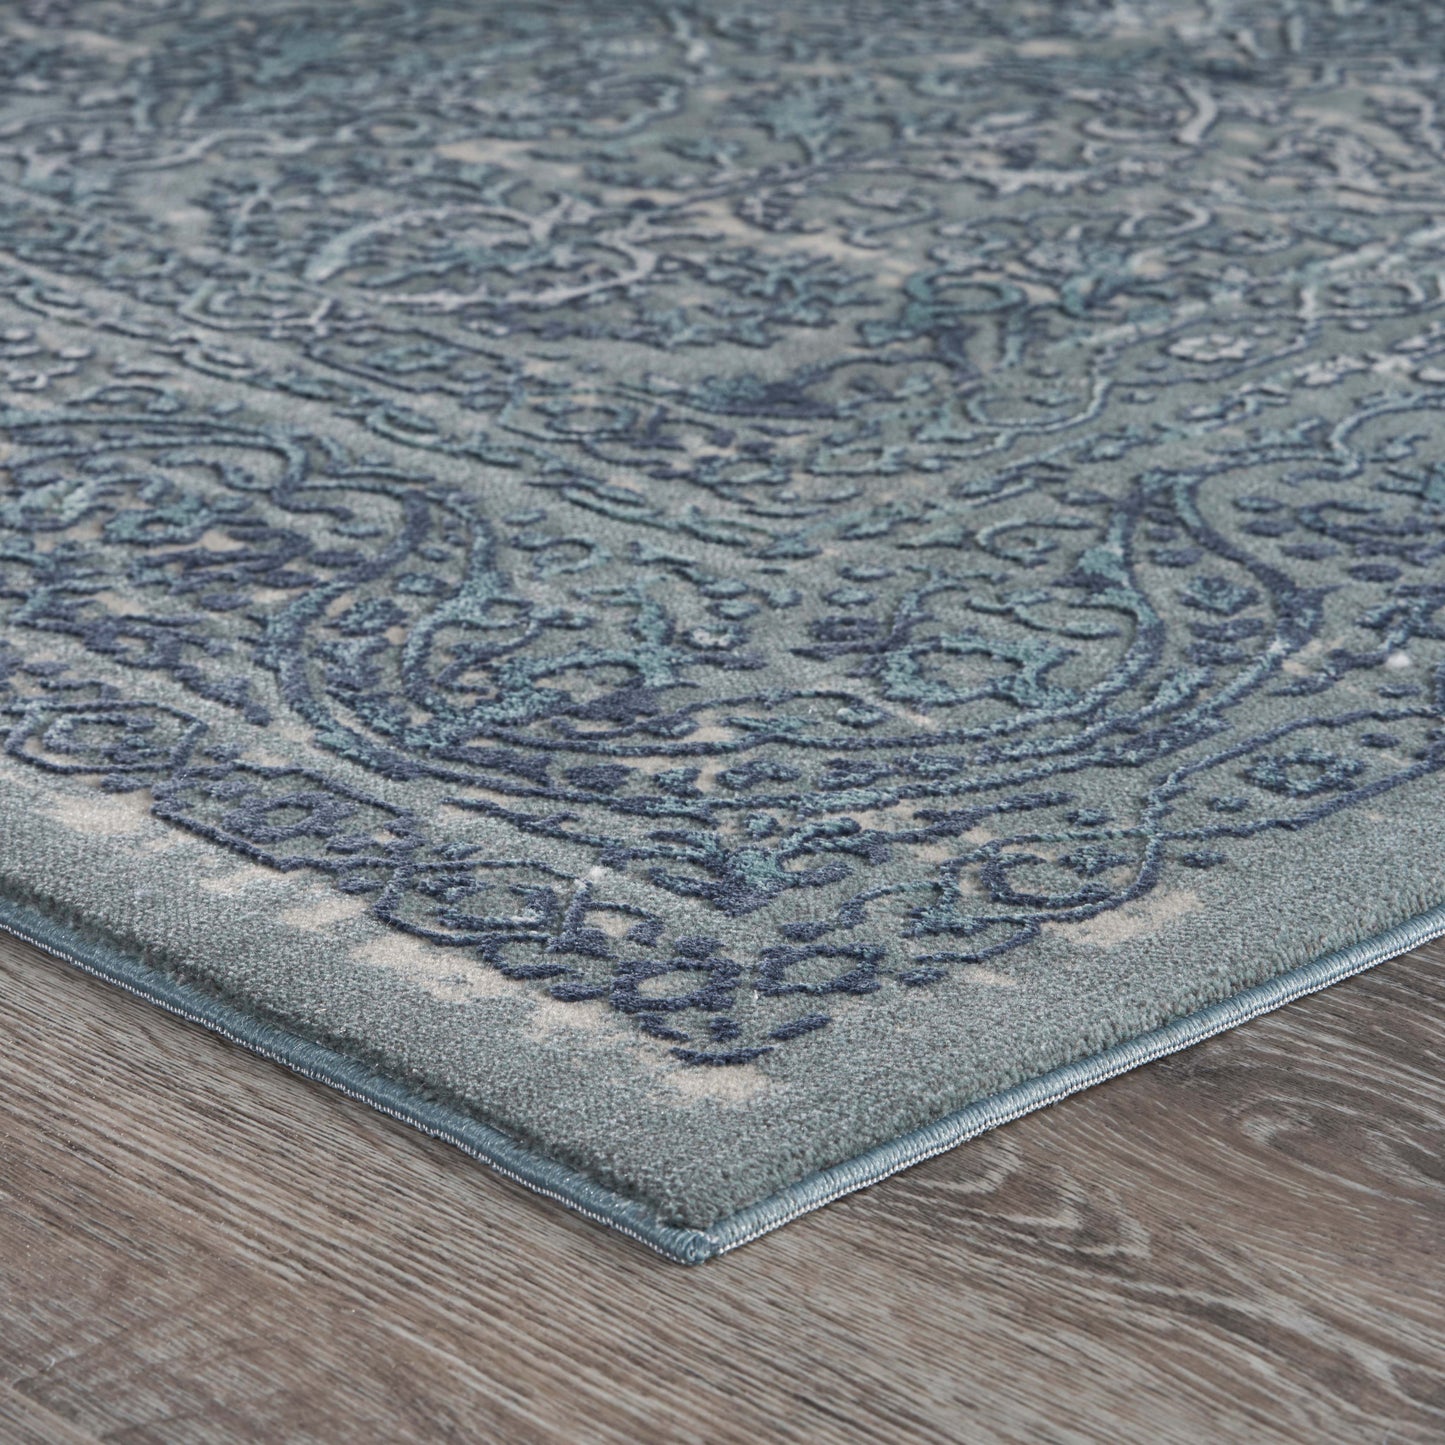 8' Blue Silver Gray And Cream Damask Distressed Runner Rug